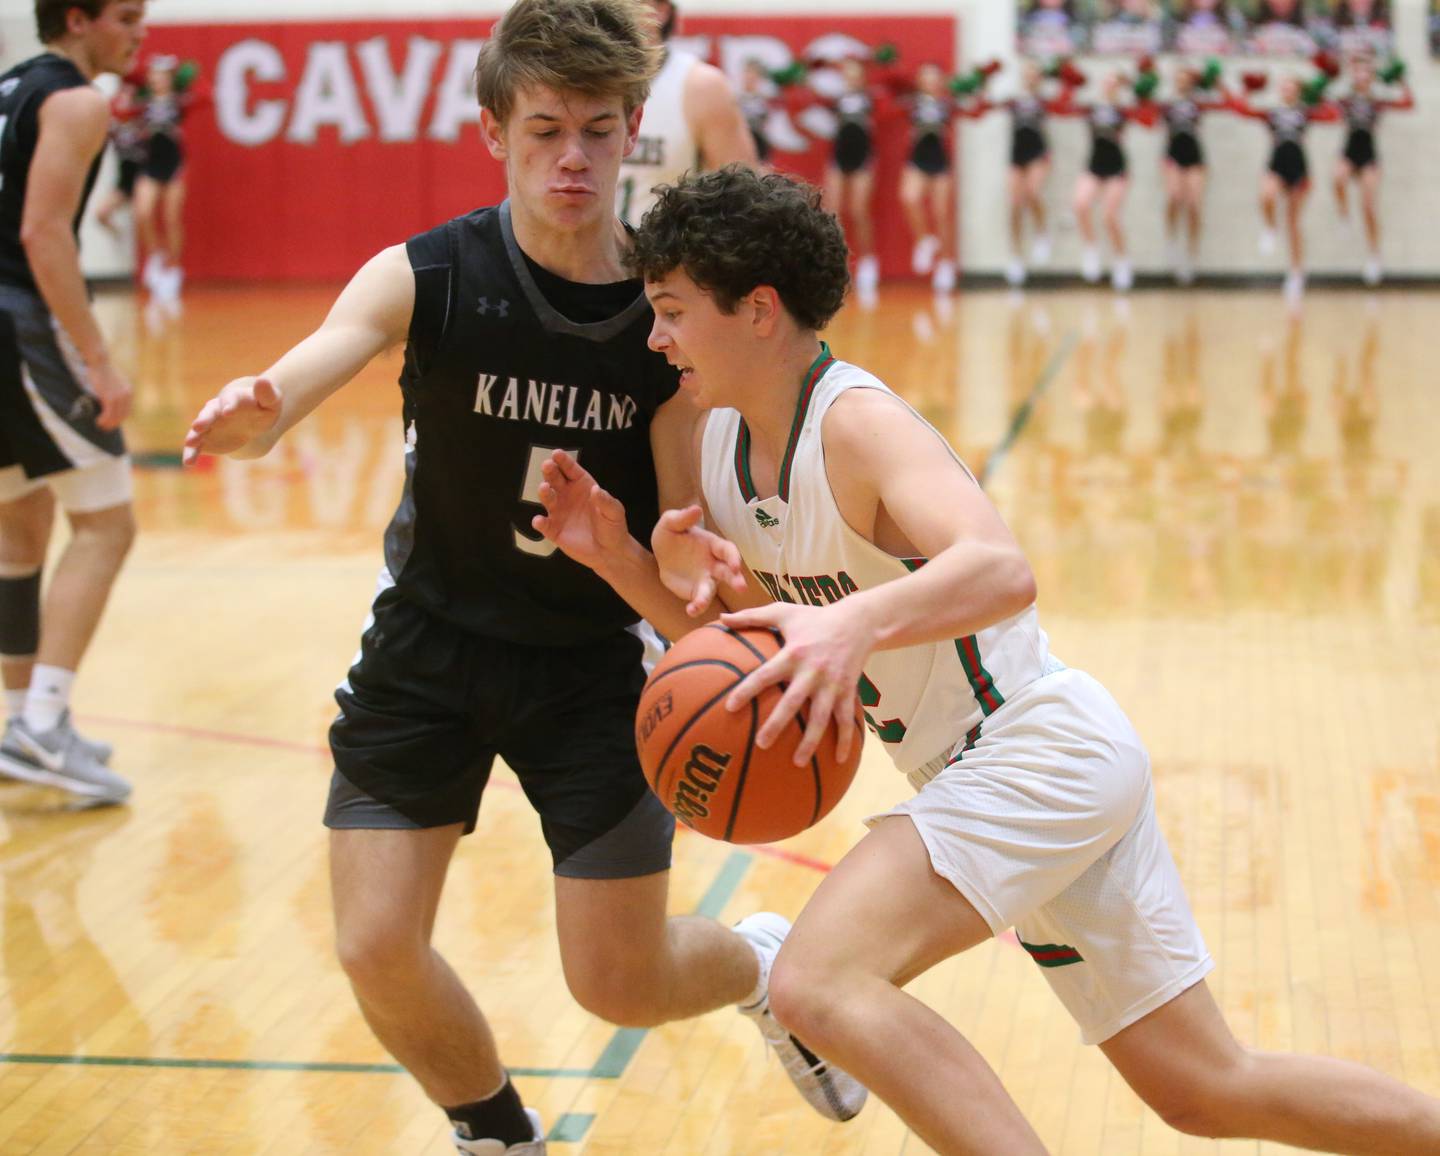 L-P's Michael Hartman drives to the lane as Kaneland's Brad Franck defends on Tuesday, Dec. 12, 2023 in Sellett Gymnasium.